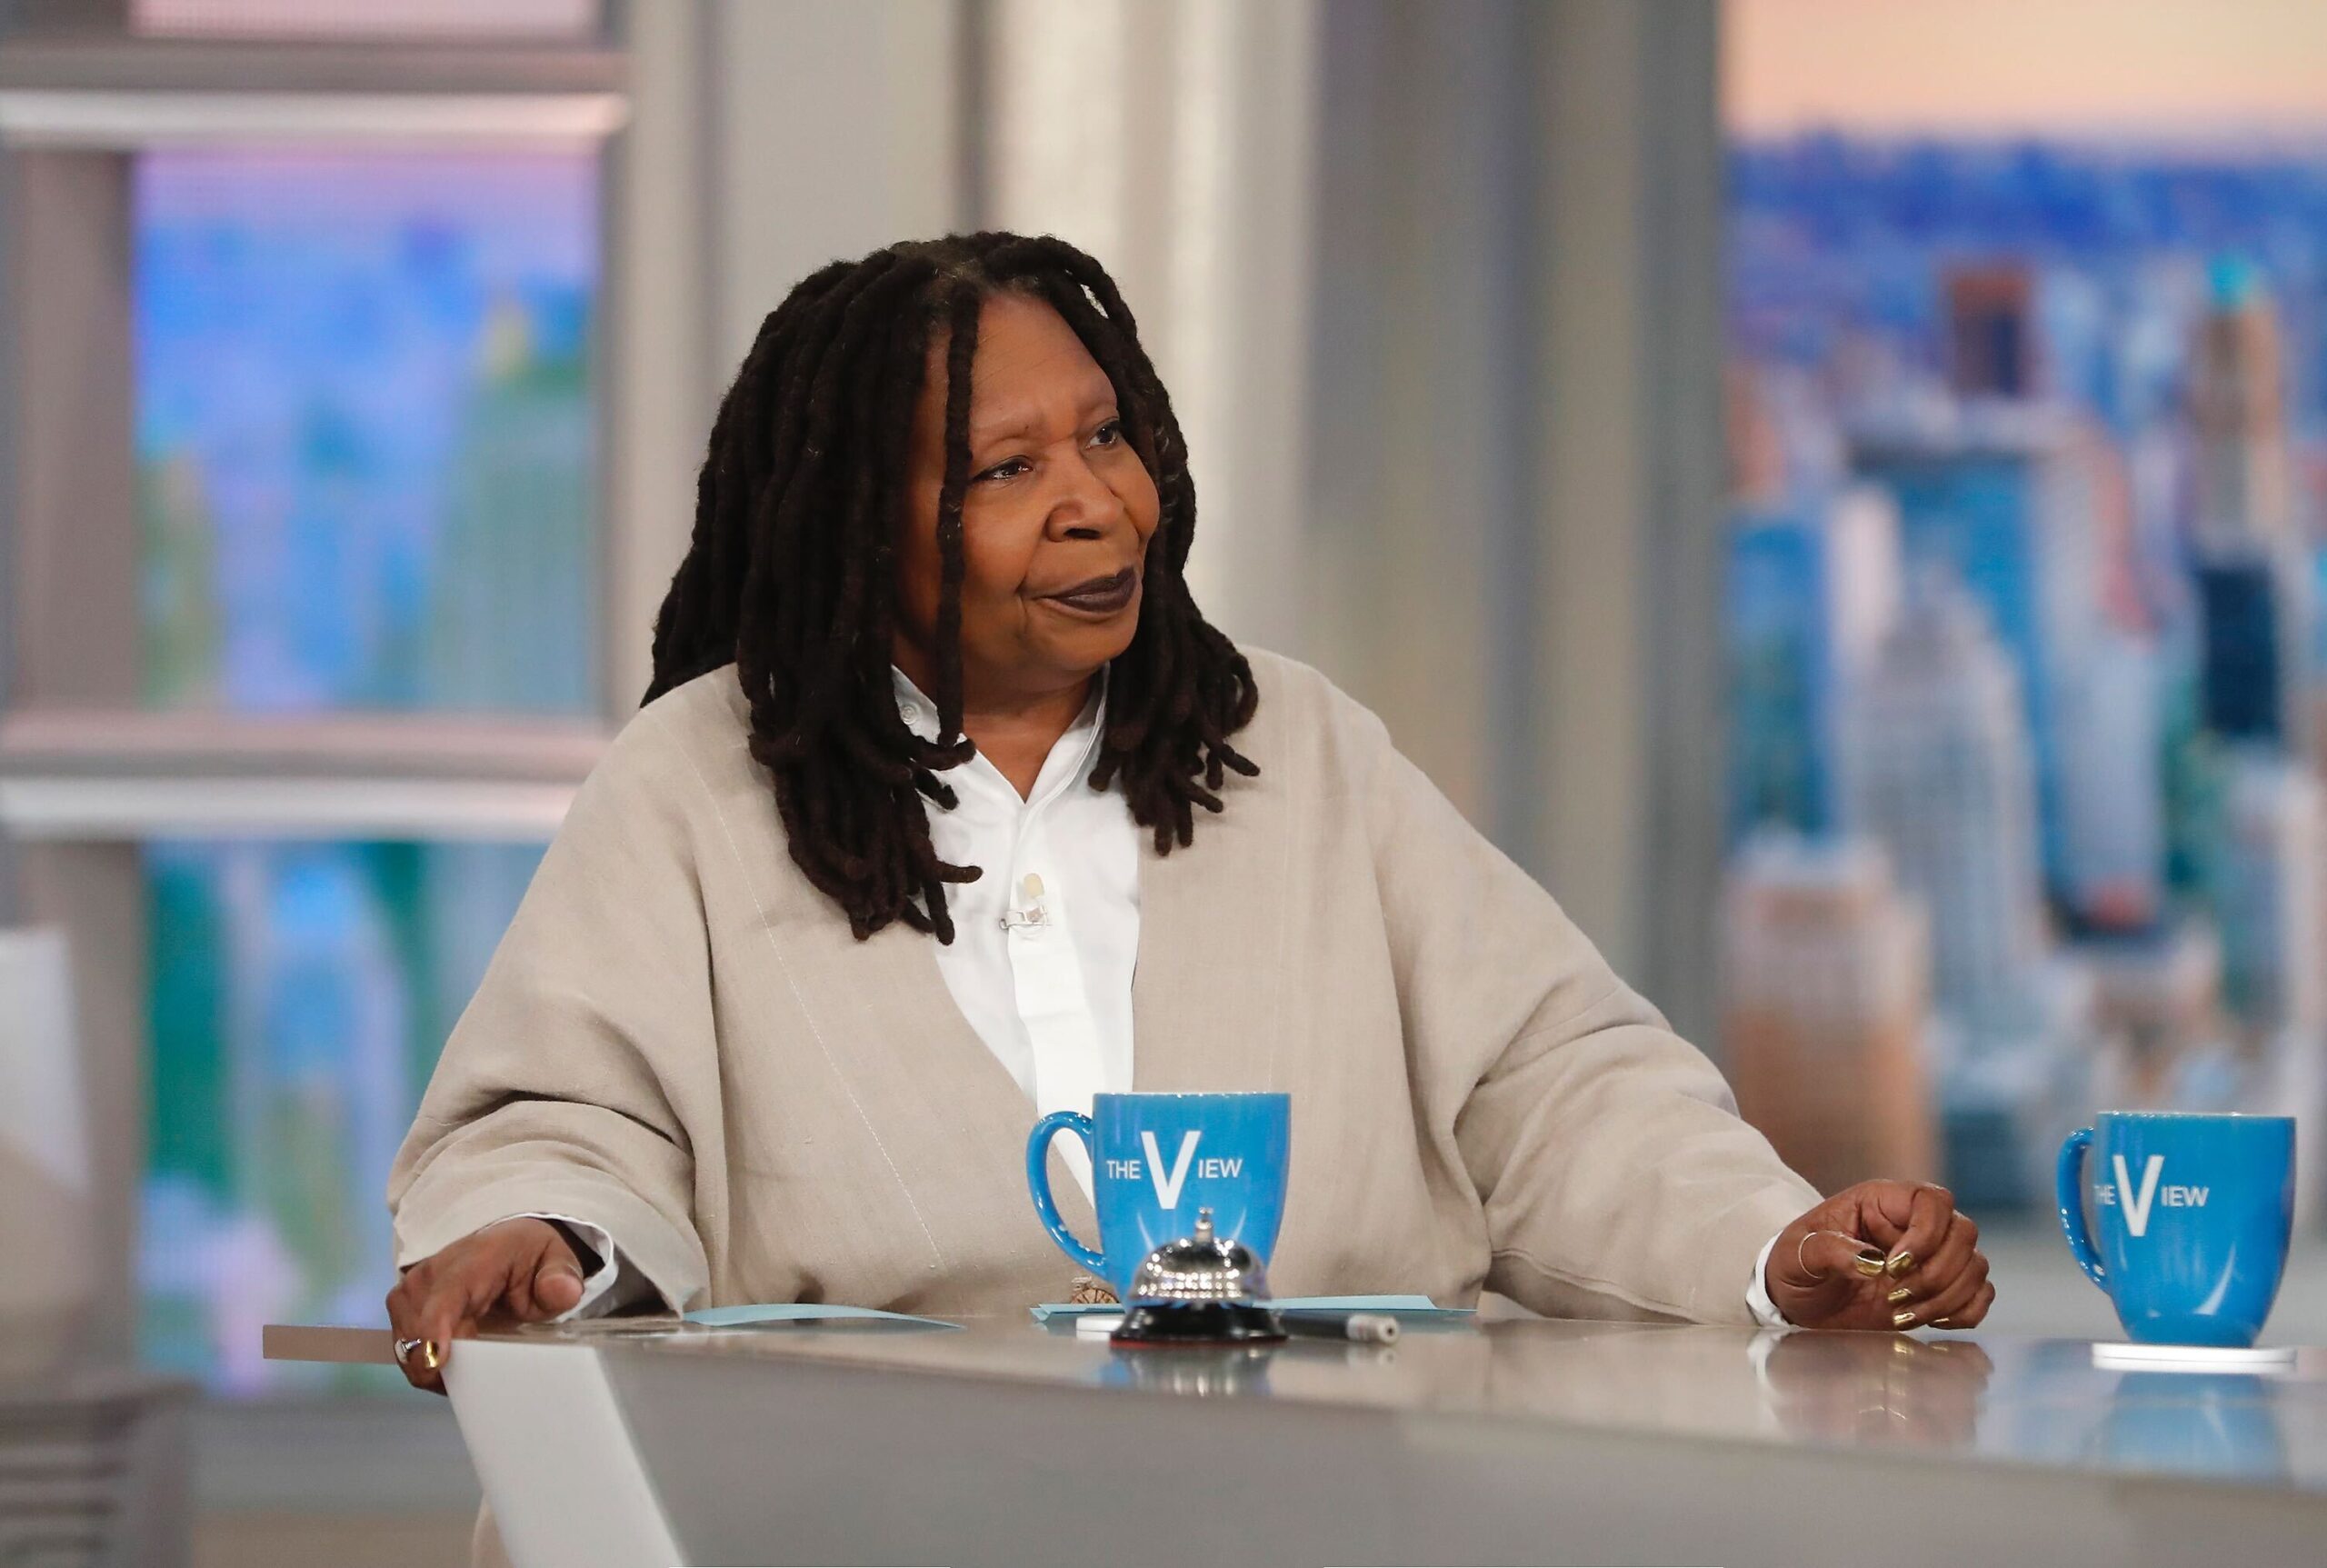 Whoopi Goldberg Would Accept The Offer To Become An Investor On 'Shark Tank' Under One Condition